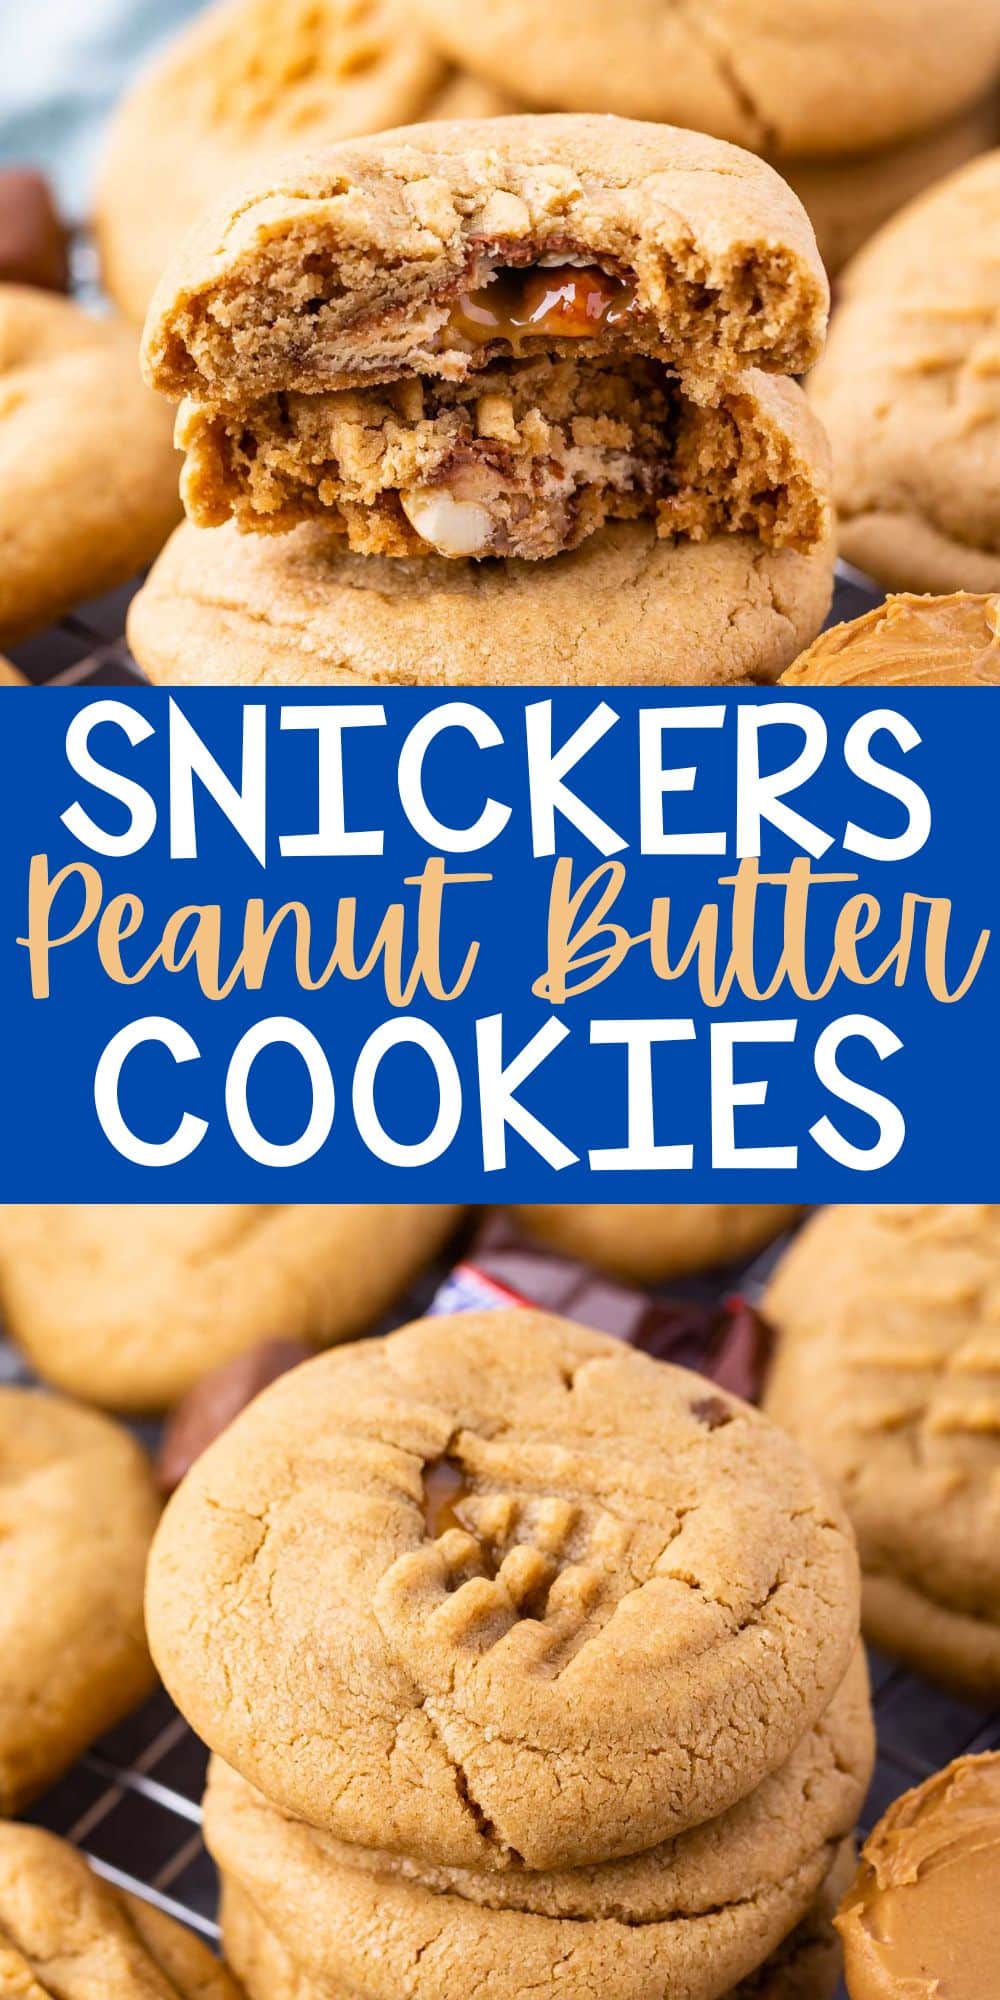 two photos of stacked peanut butter cookies with a snickers baked inside with words on the photo.